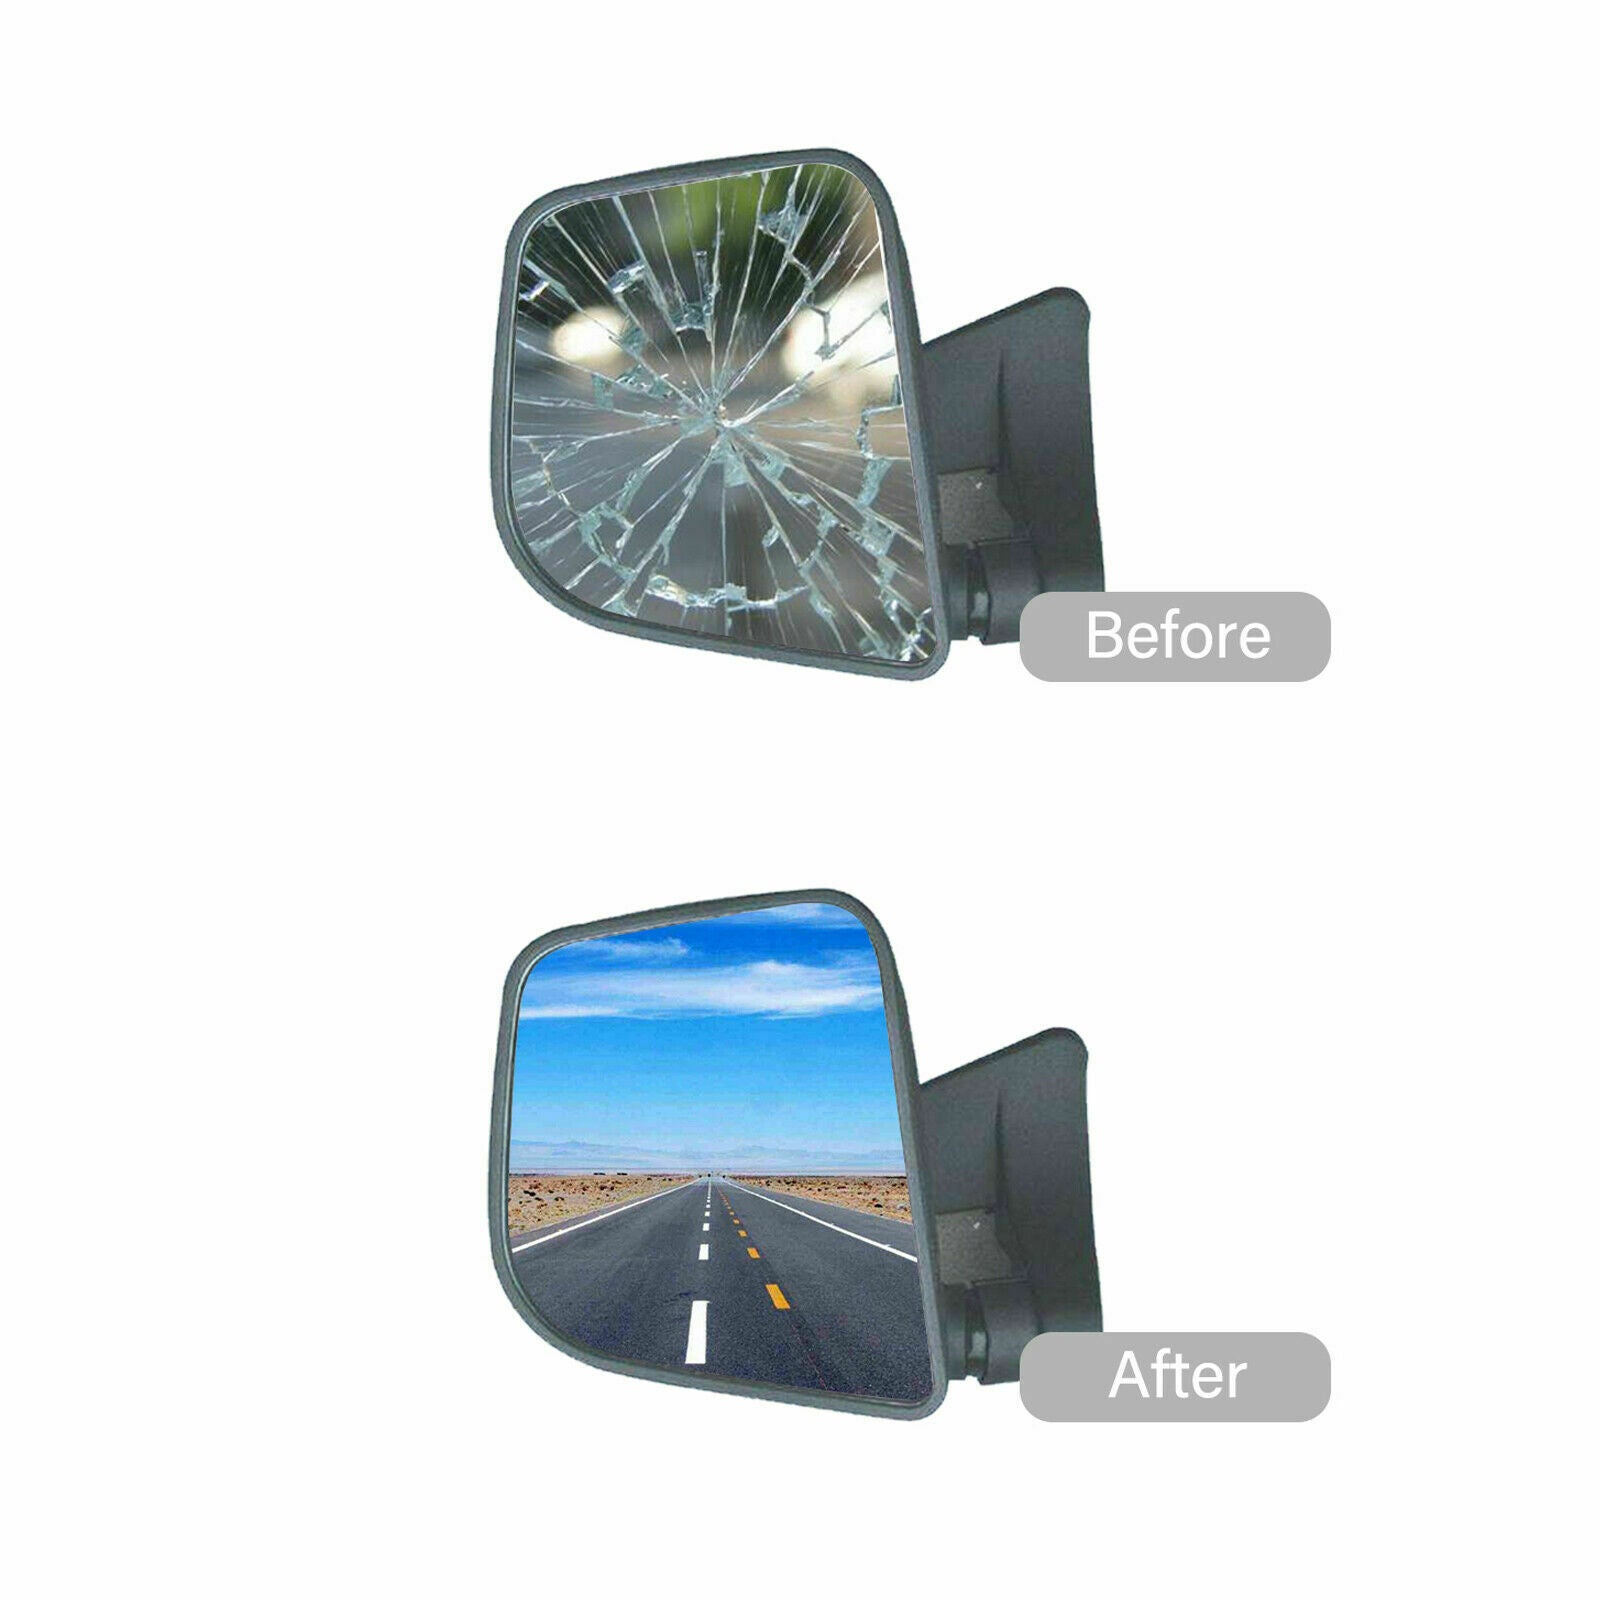 WLLW Blind-Spot Mirror Glass Replacement for 2015-2019 Ford F-150, Driver Left Side LH/Passenger Right Side RH/The Both Sides Convex M-0050